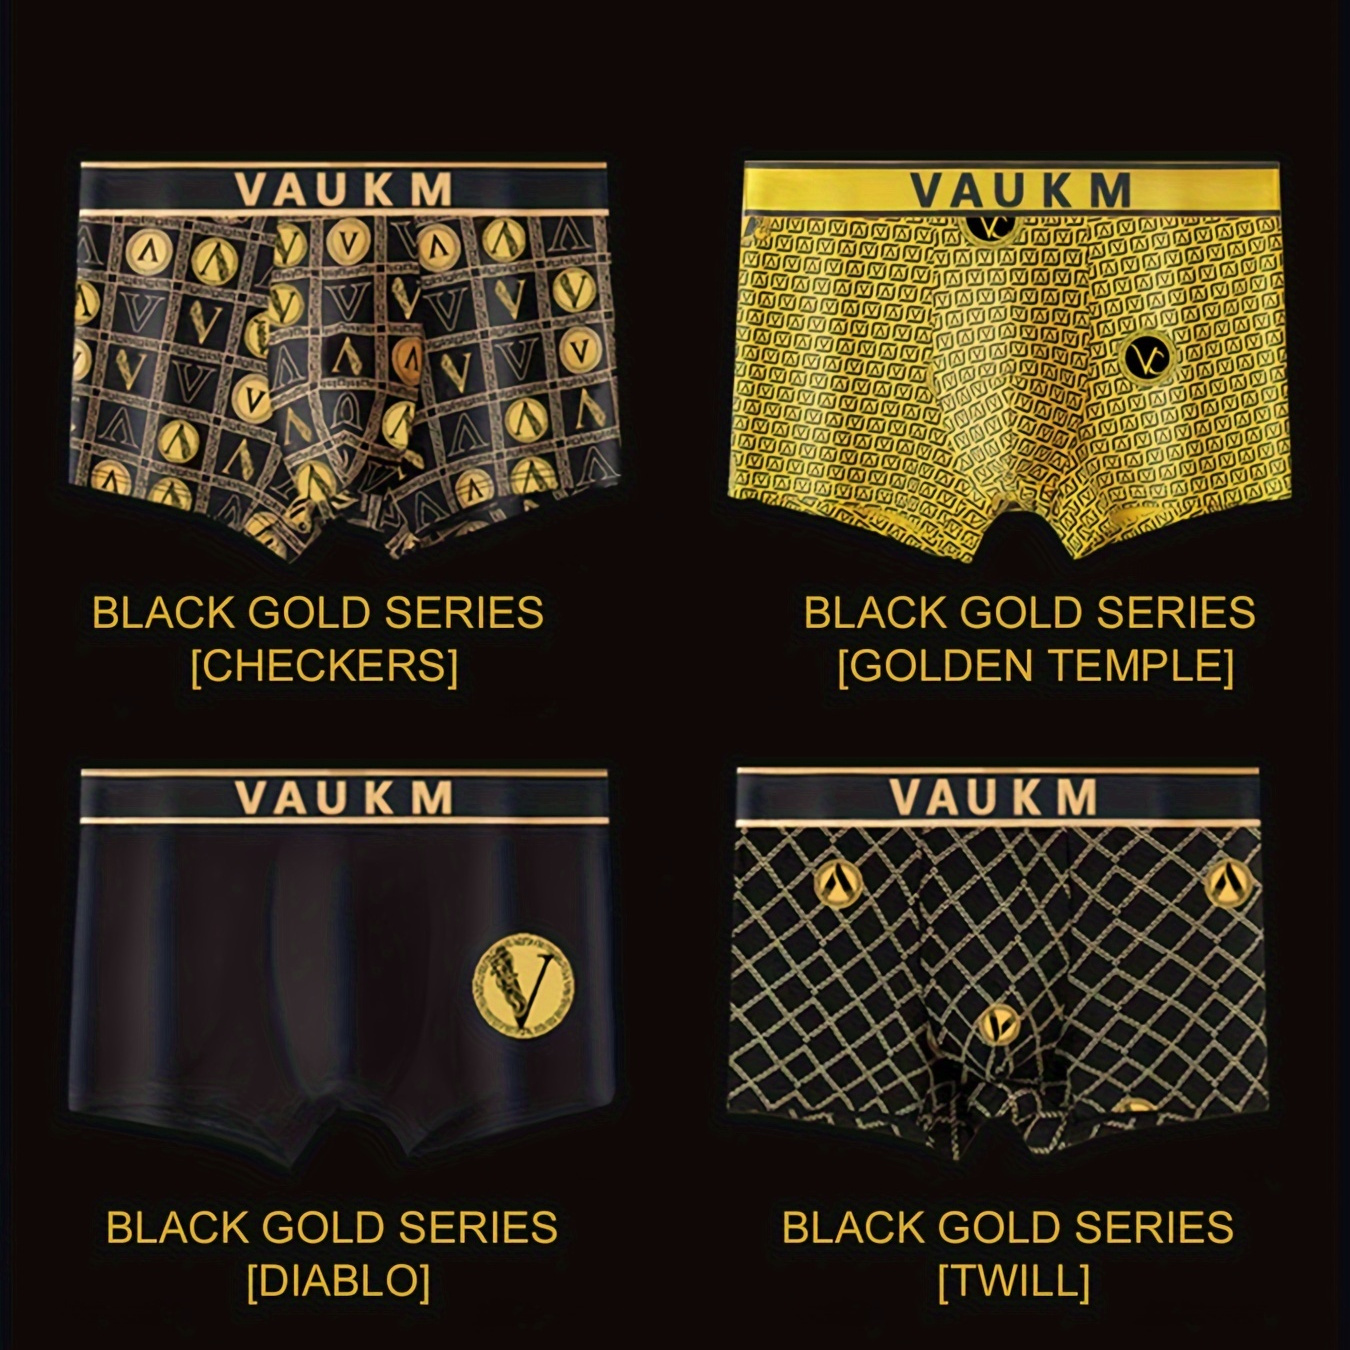 

4pcs Men's Black Gold Antibacterial Underwear, Casual Boxer Briefs Shorts, Breathable Comfy Stretchy Boxer Trunks, Sports Shorts